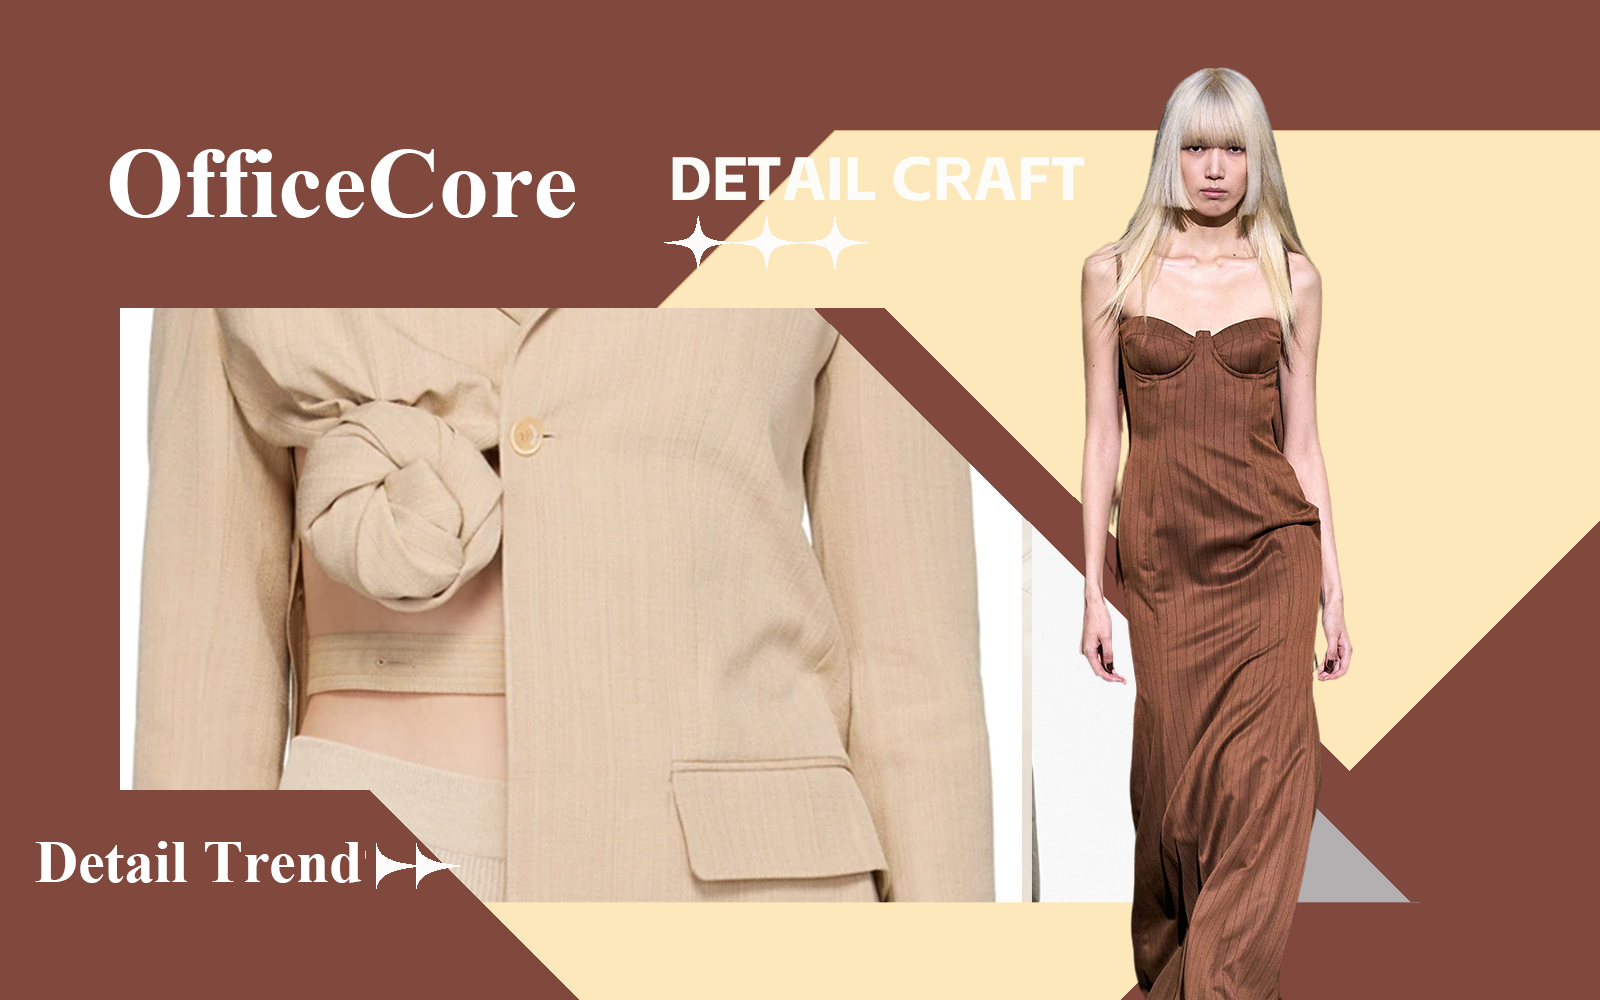 OfficeCore -- The Detail & Craft Trend for Womenswear